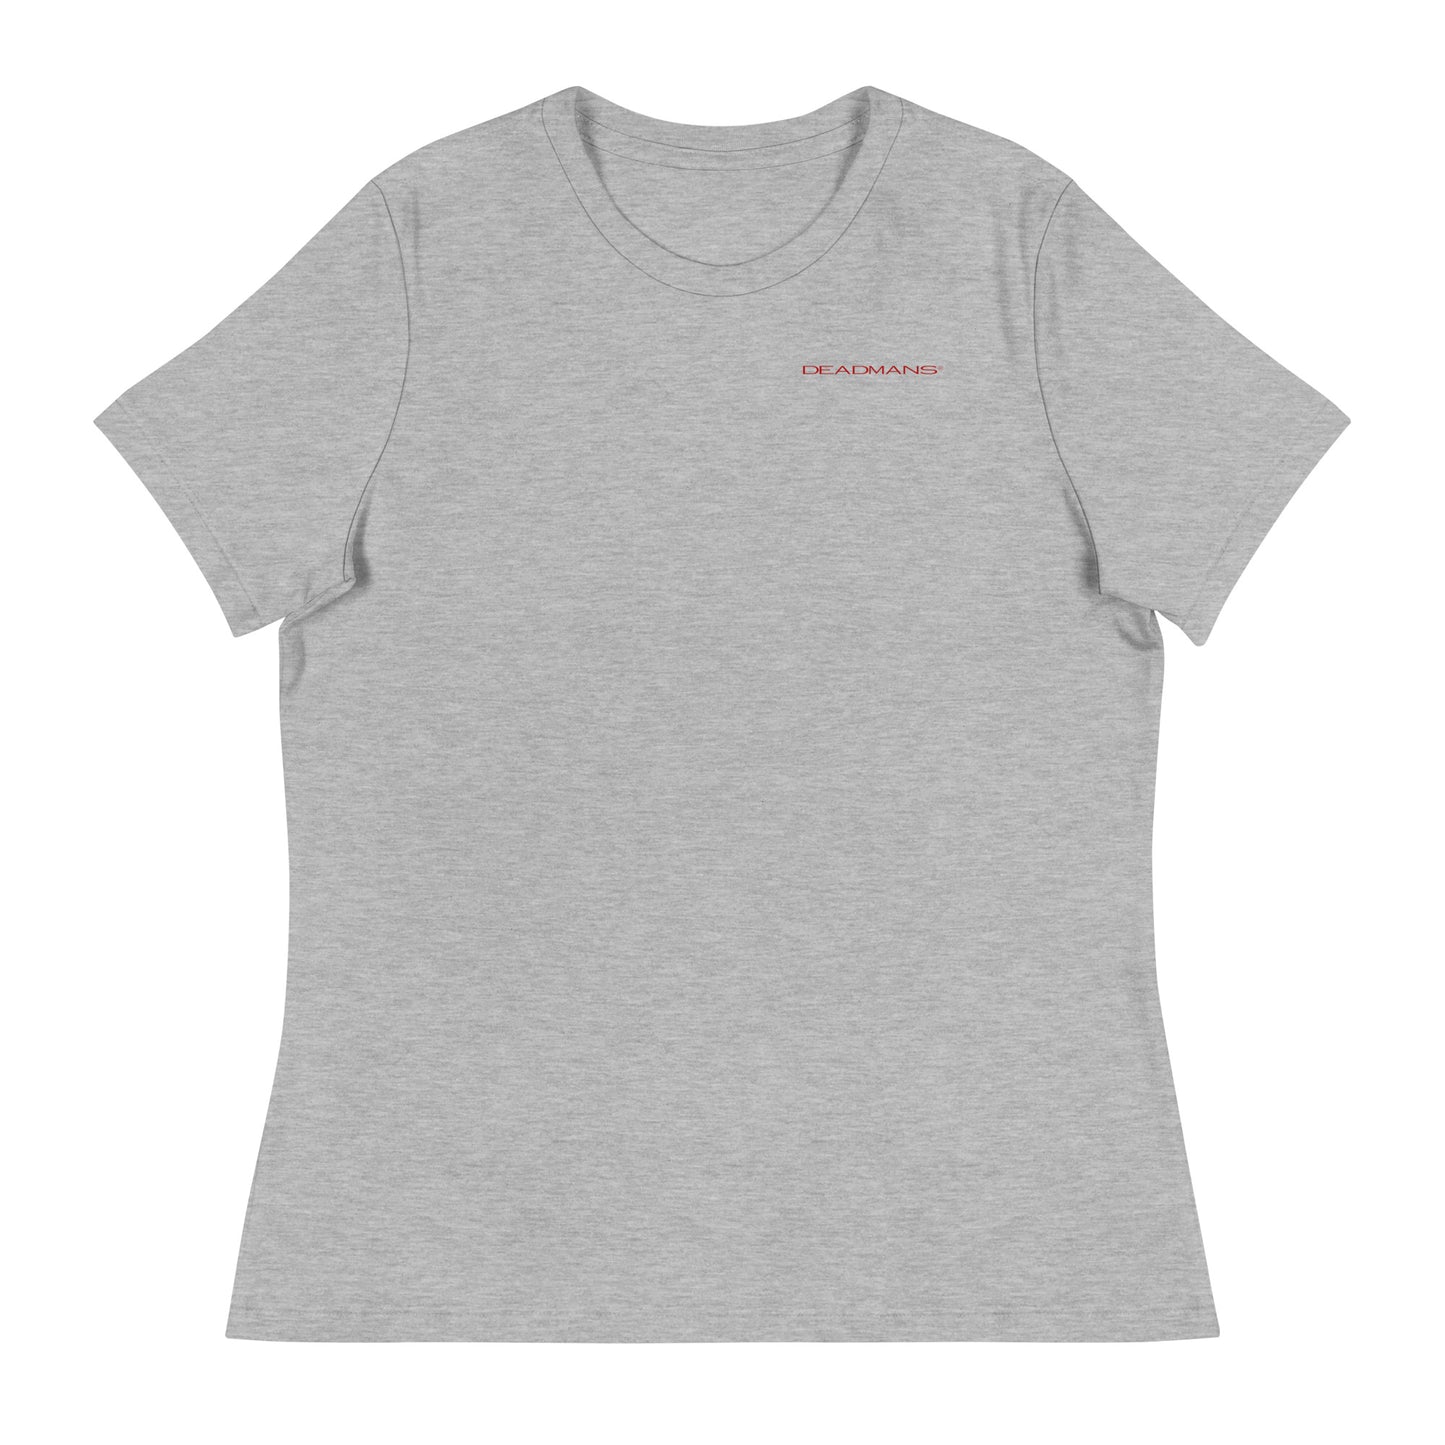 Women's Relaxed T-Shirt - Tubed on Coffin